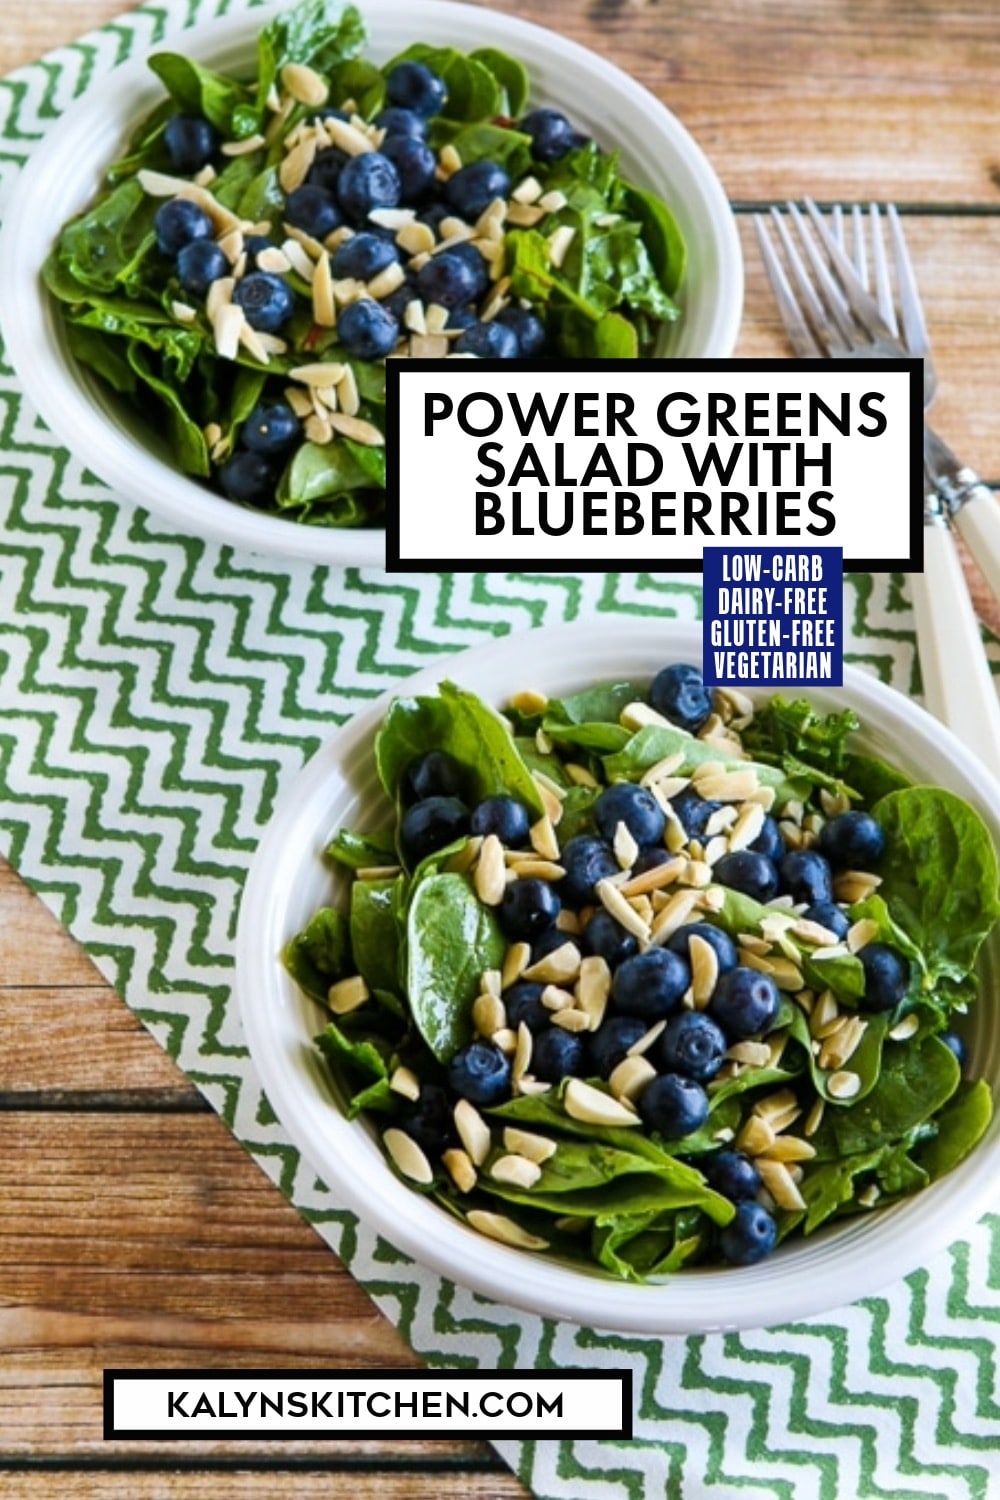 Pinterest image of Power Greens Salad with Blueberries